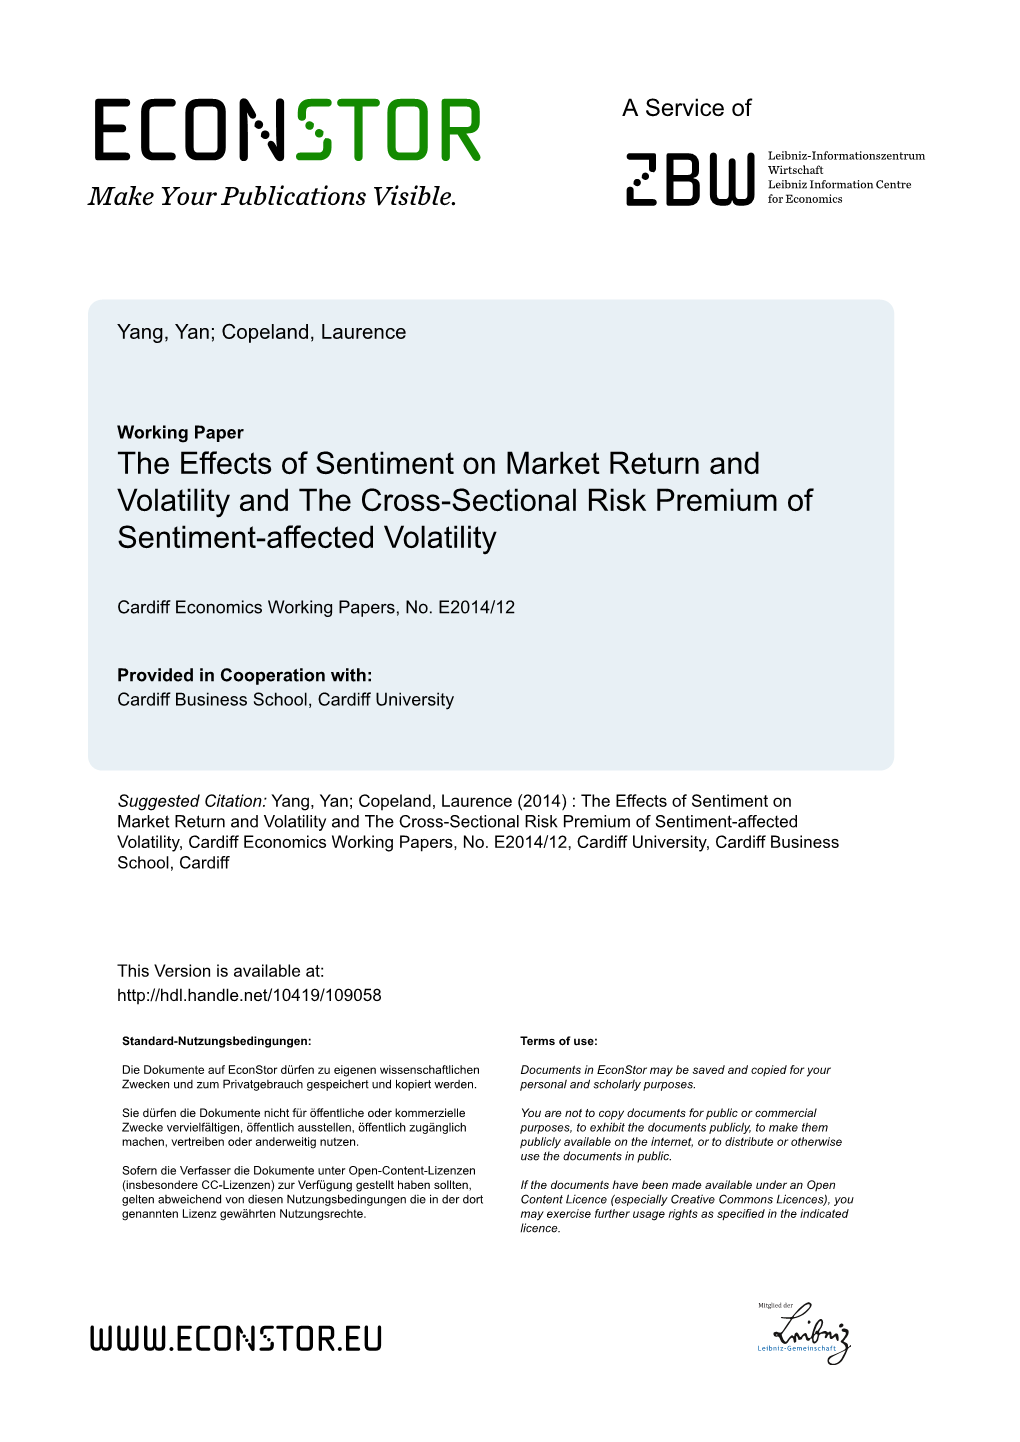 The Effects of Sentiment on Market Return and Volatility and the Cross-Sectional Risk Premium of Sentiment-Affected Volatility